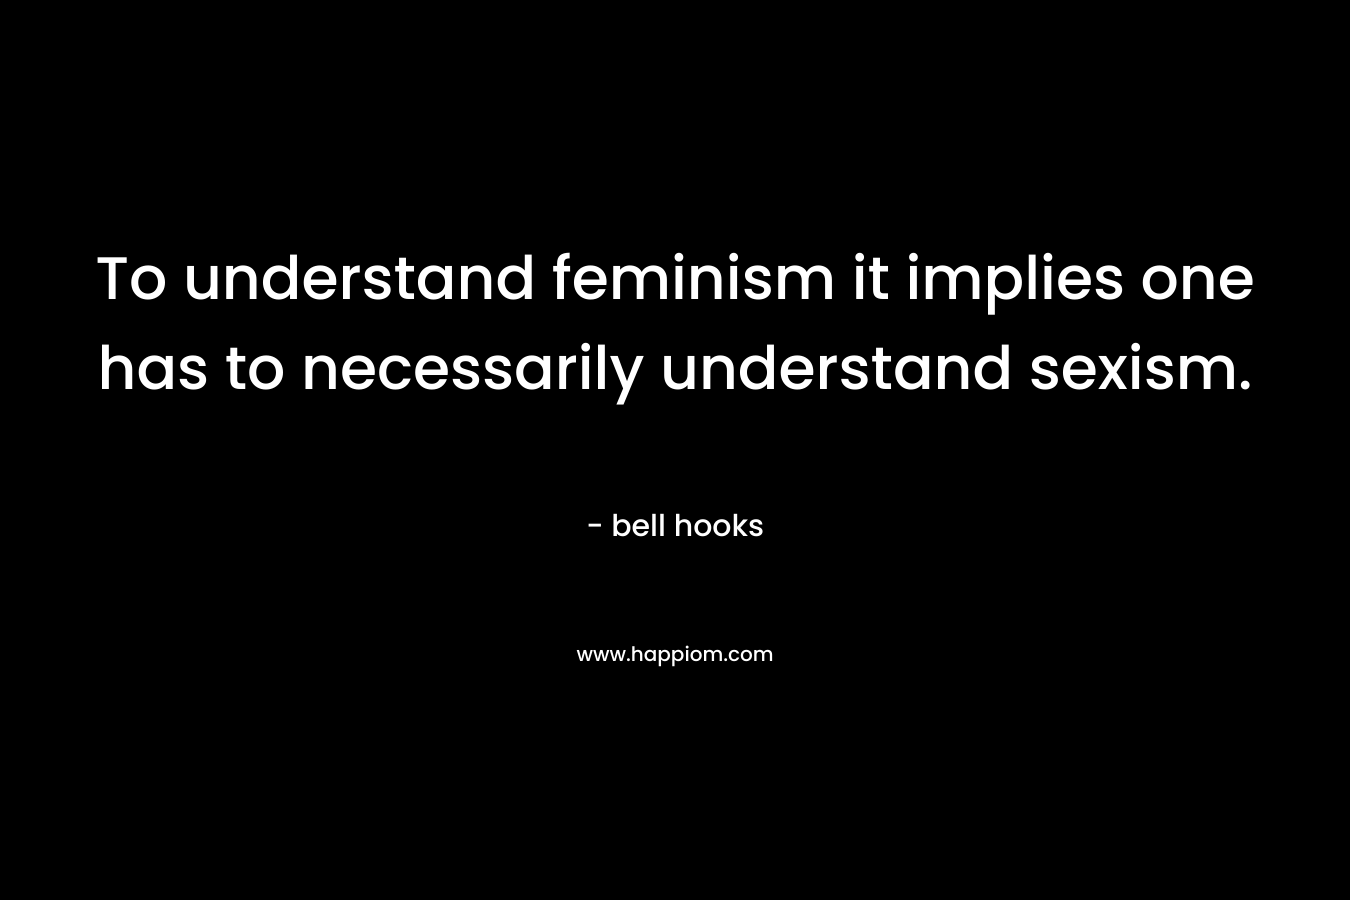 To understand feminism it implies one has to necessarily understand sexism.